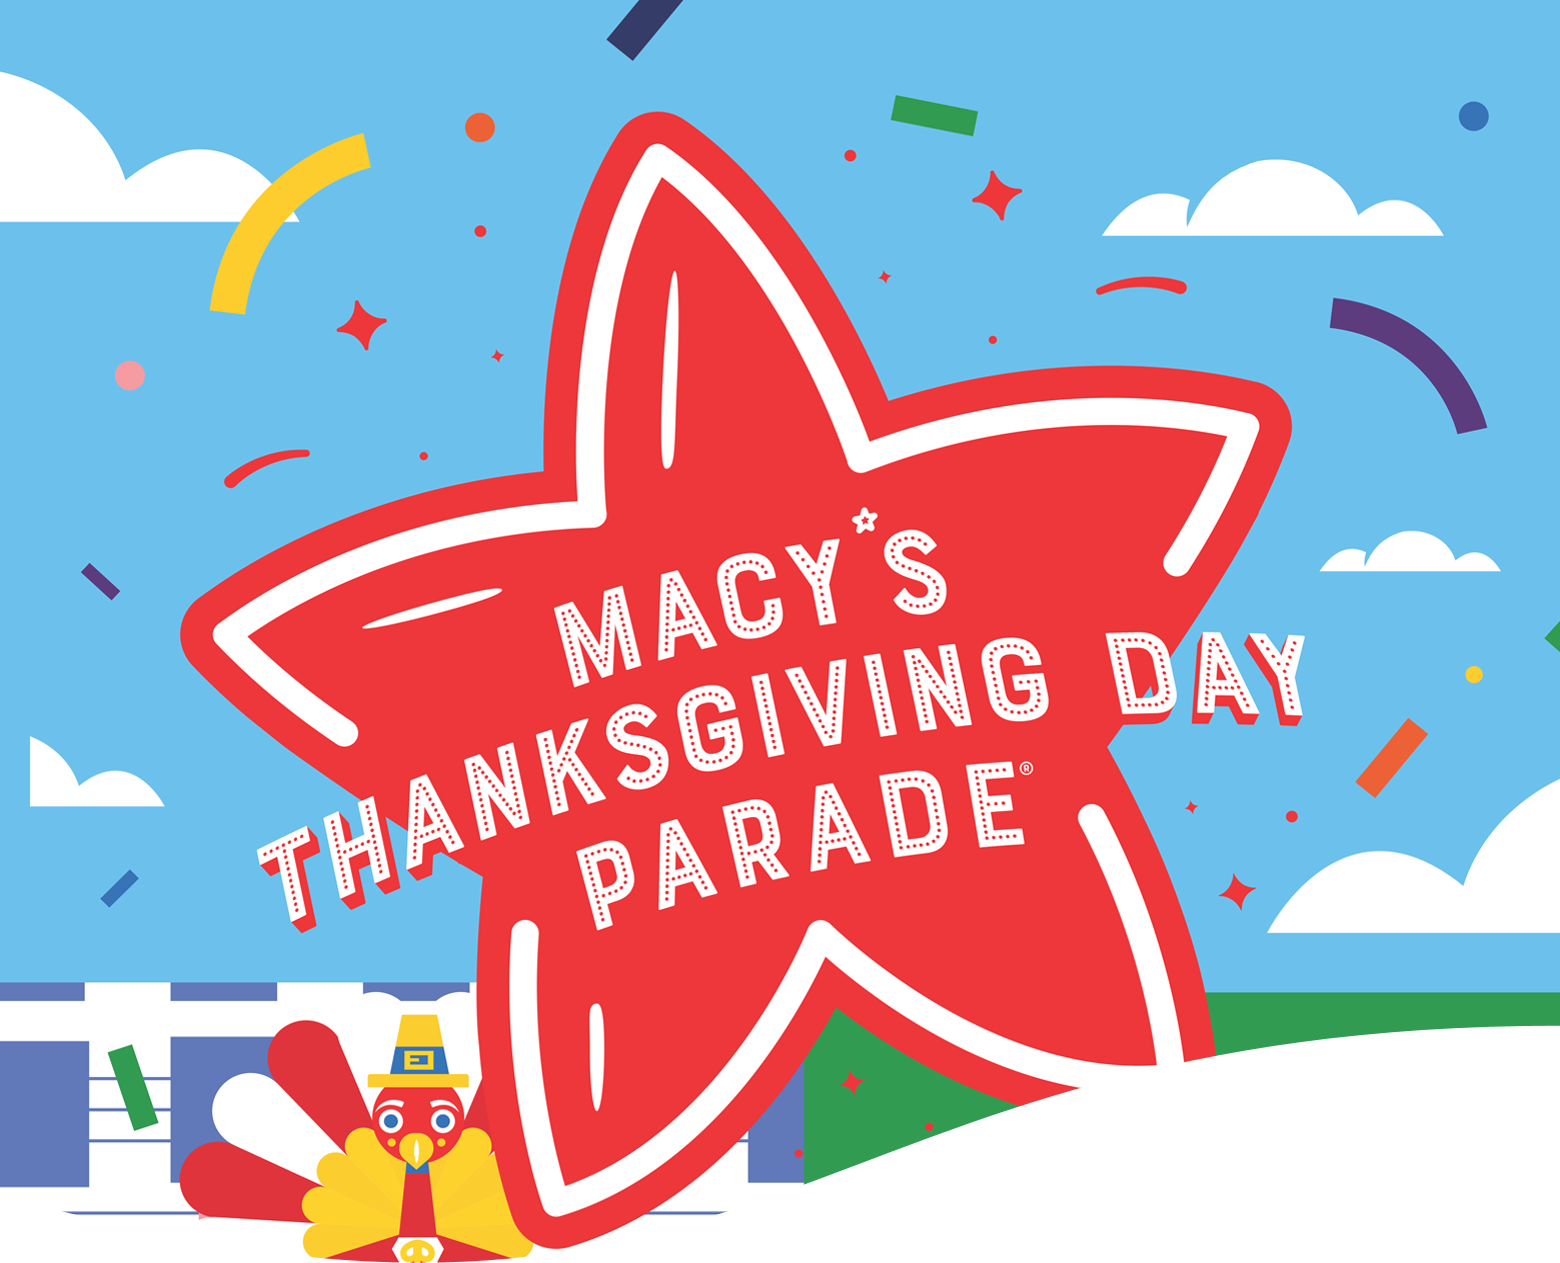 Audio Descriptions Available for Macys Parade this week